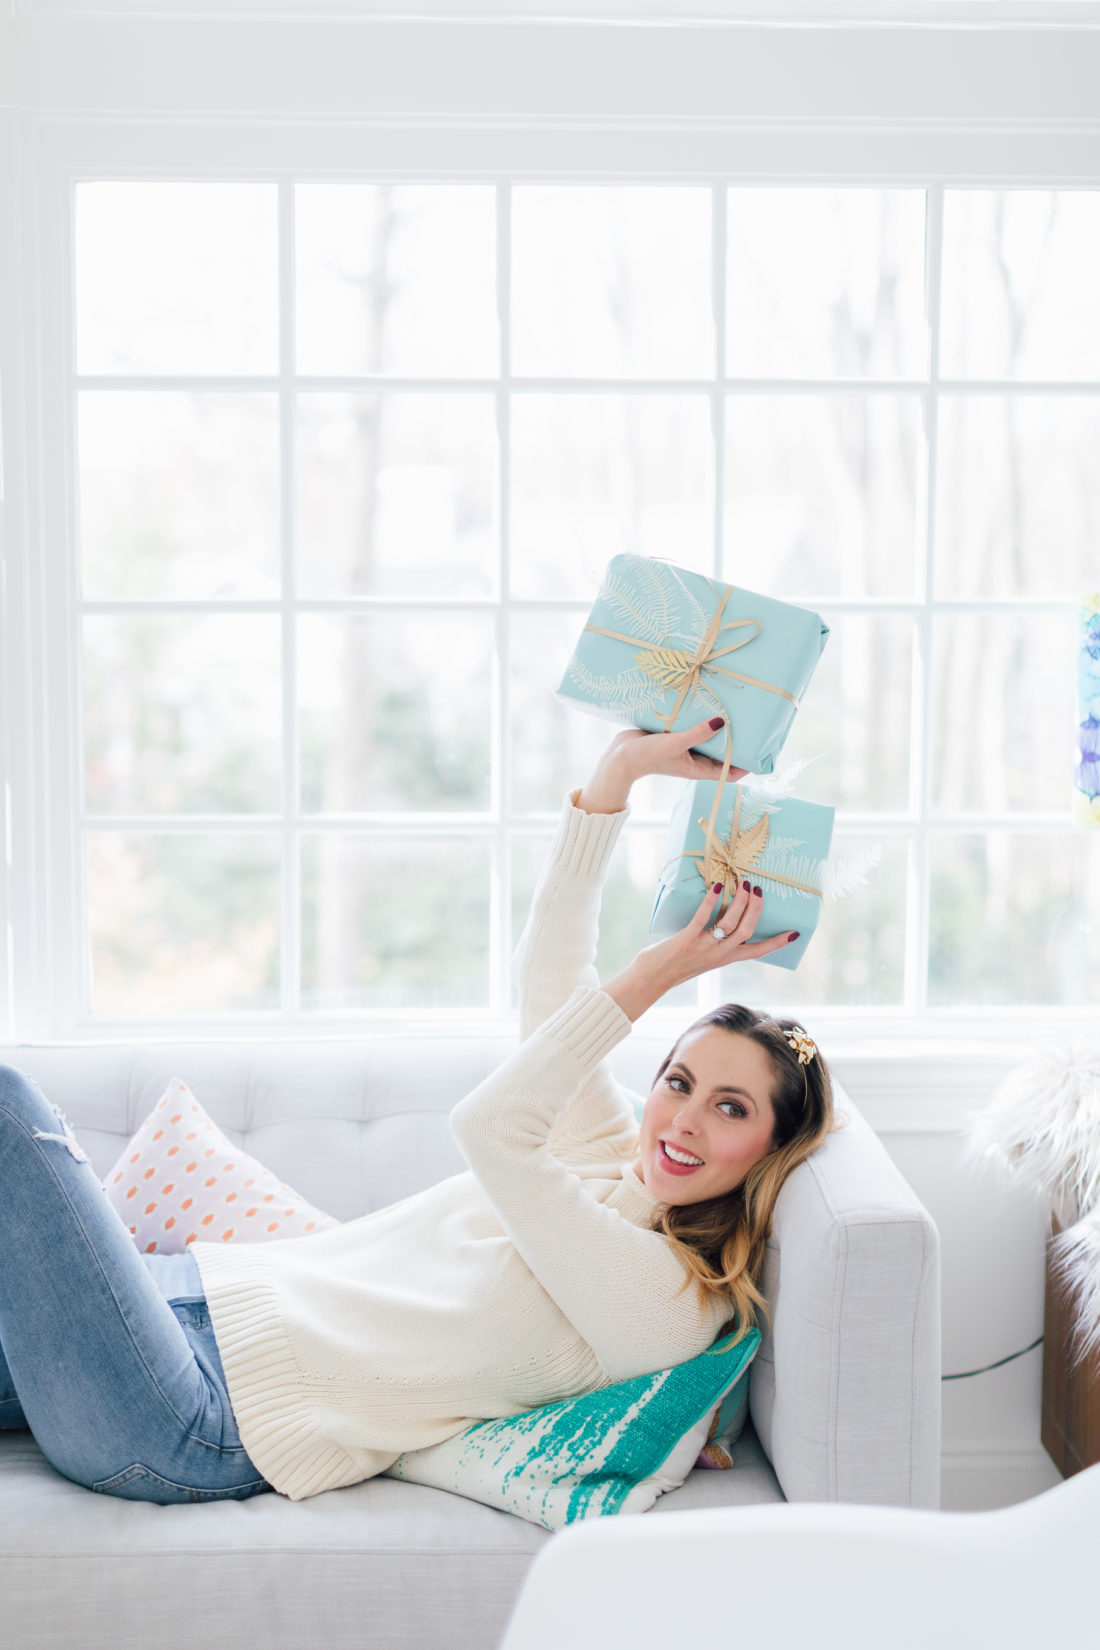 Eva Amurri Martino wears her cream colored sweater and levi jeans, and lays on the couch at home, holding robin's egg colored gifts with gold ribbon